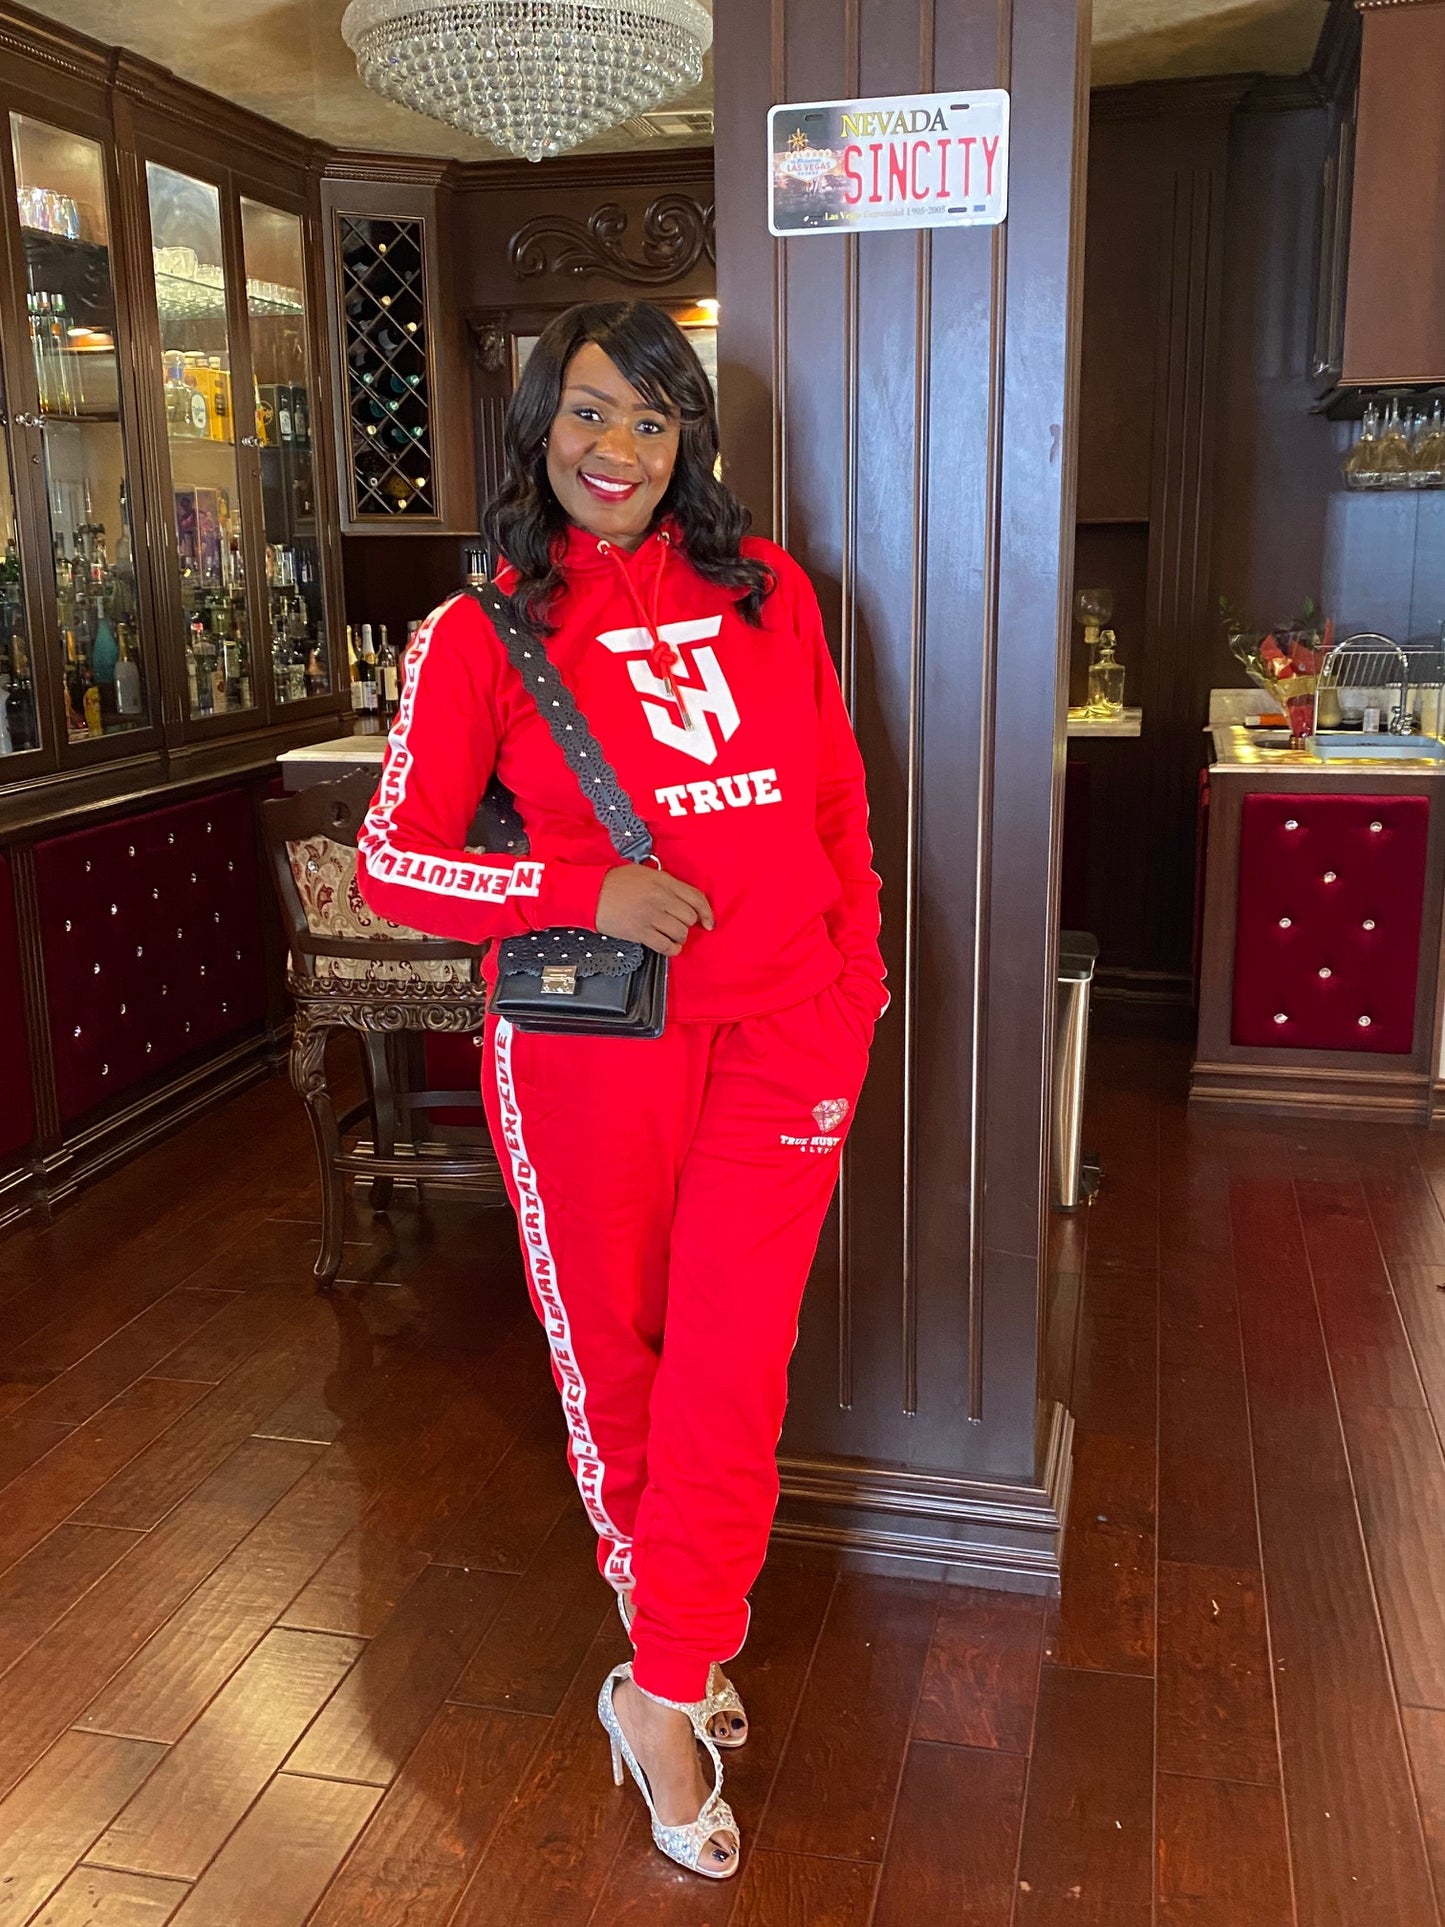 True Hustler 4 Lyfe "LGE" Collection Red Carpet Red 2 Piece Luxury Jogging Suits (Unisex)